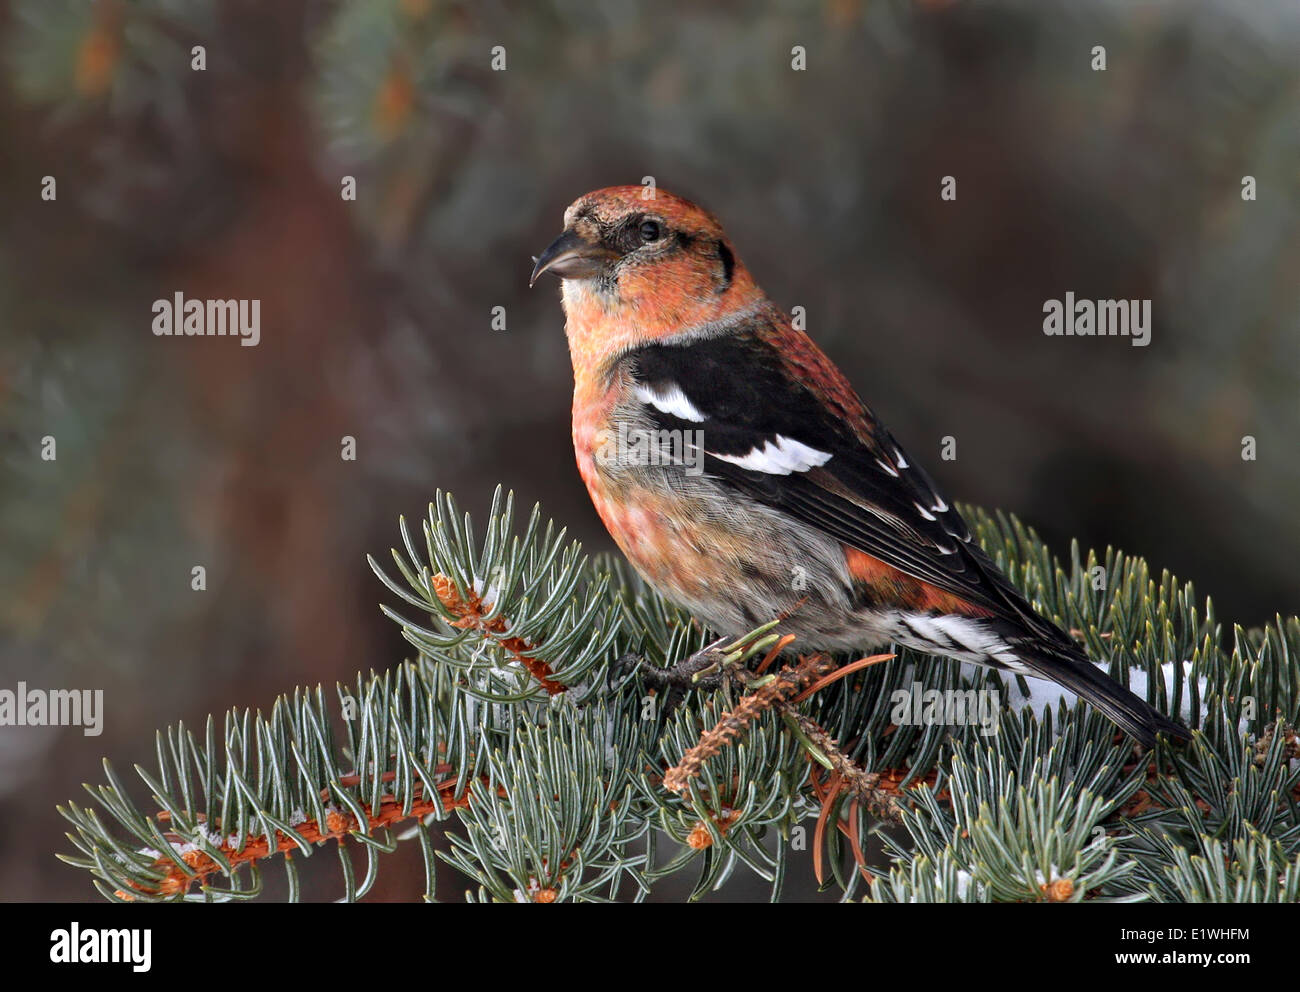 A male White-winged Crossbill, Loxia leucoptera, perched in a spruce tree,  in Saskatoon, Saskatchewan Stock Photo